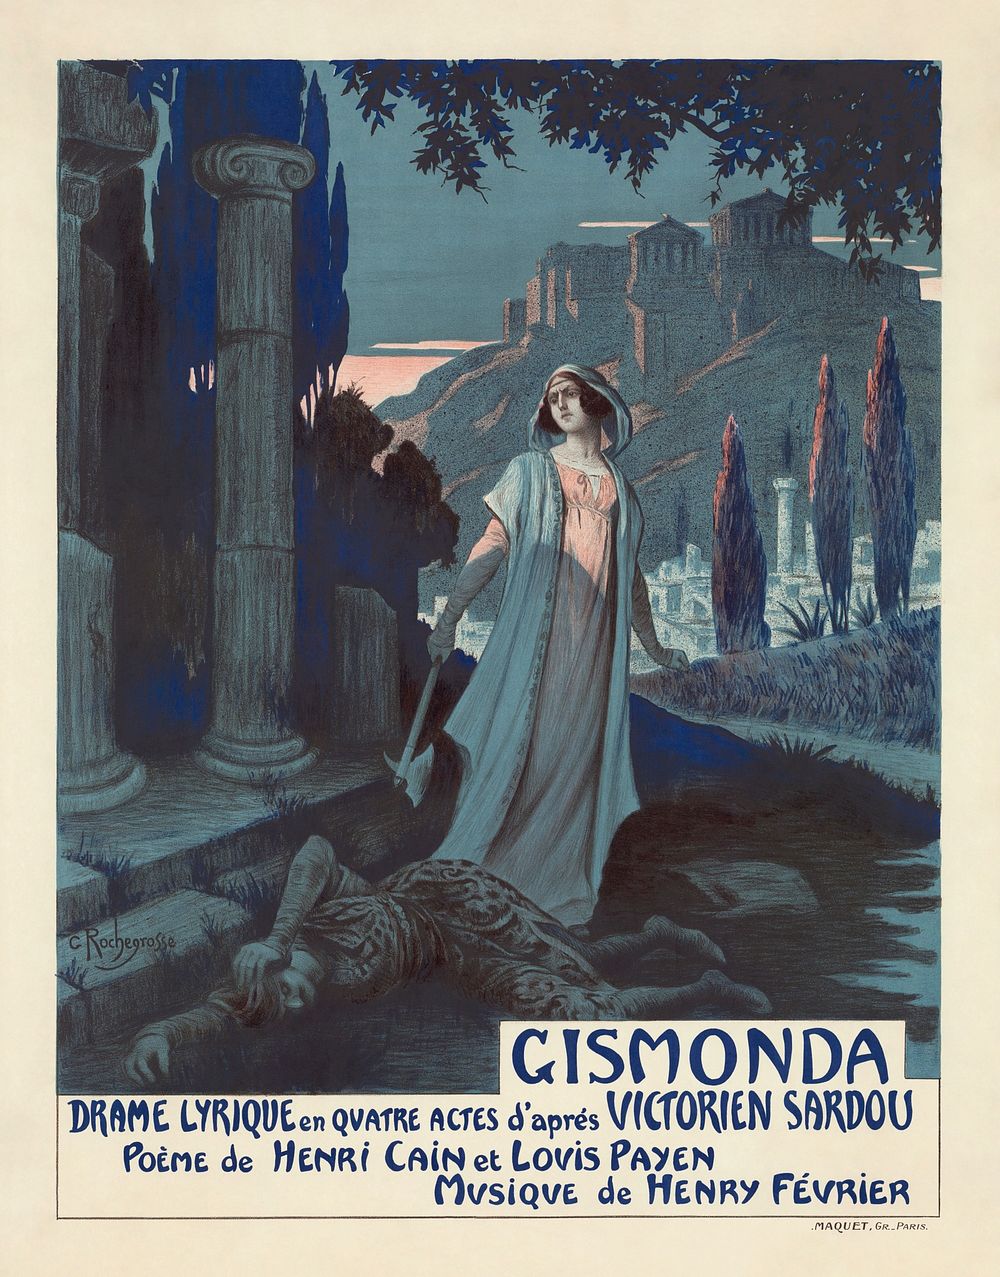 Poster for the Paris première of Gismonda by Henry Février, with lyrics by Henri Cain and Louis Payen after Victorien…